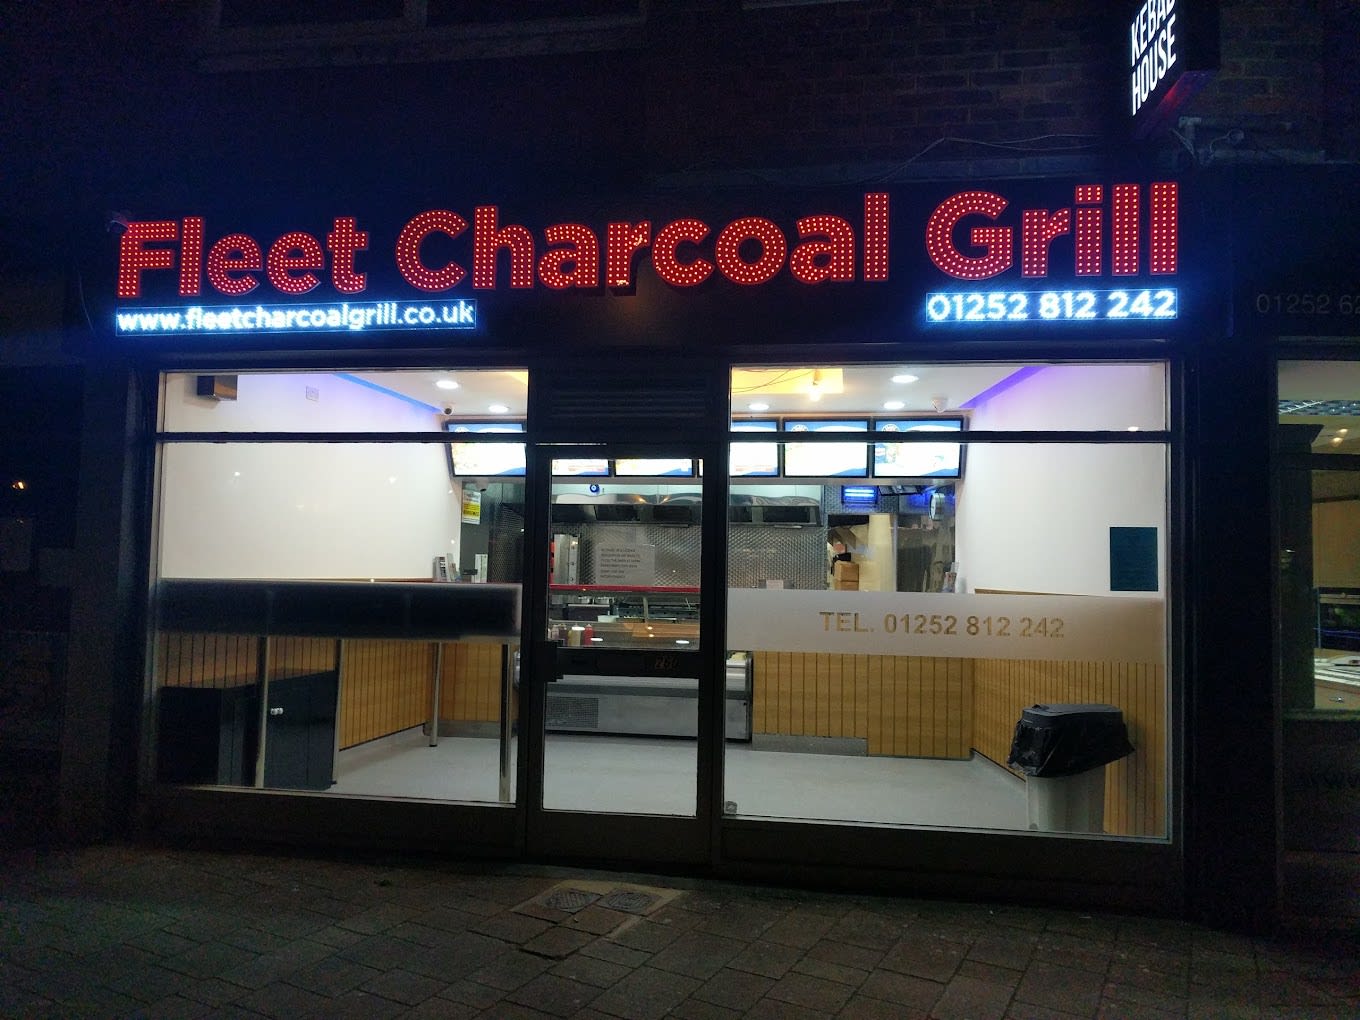 Images Fleet Charcoal Grill